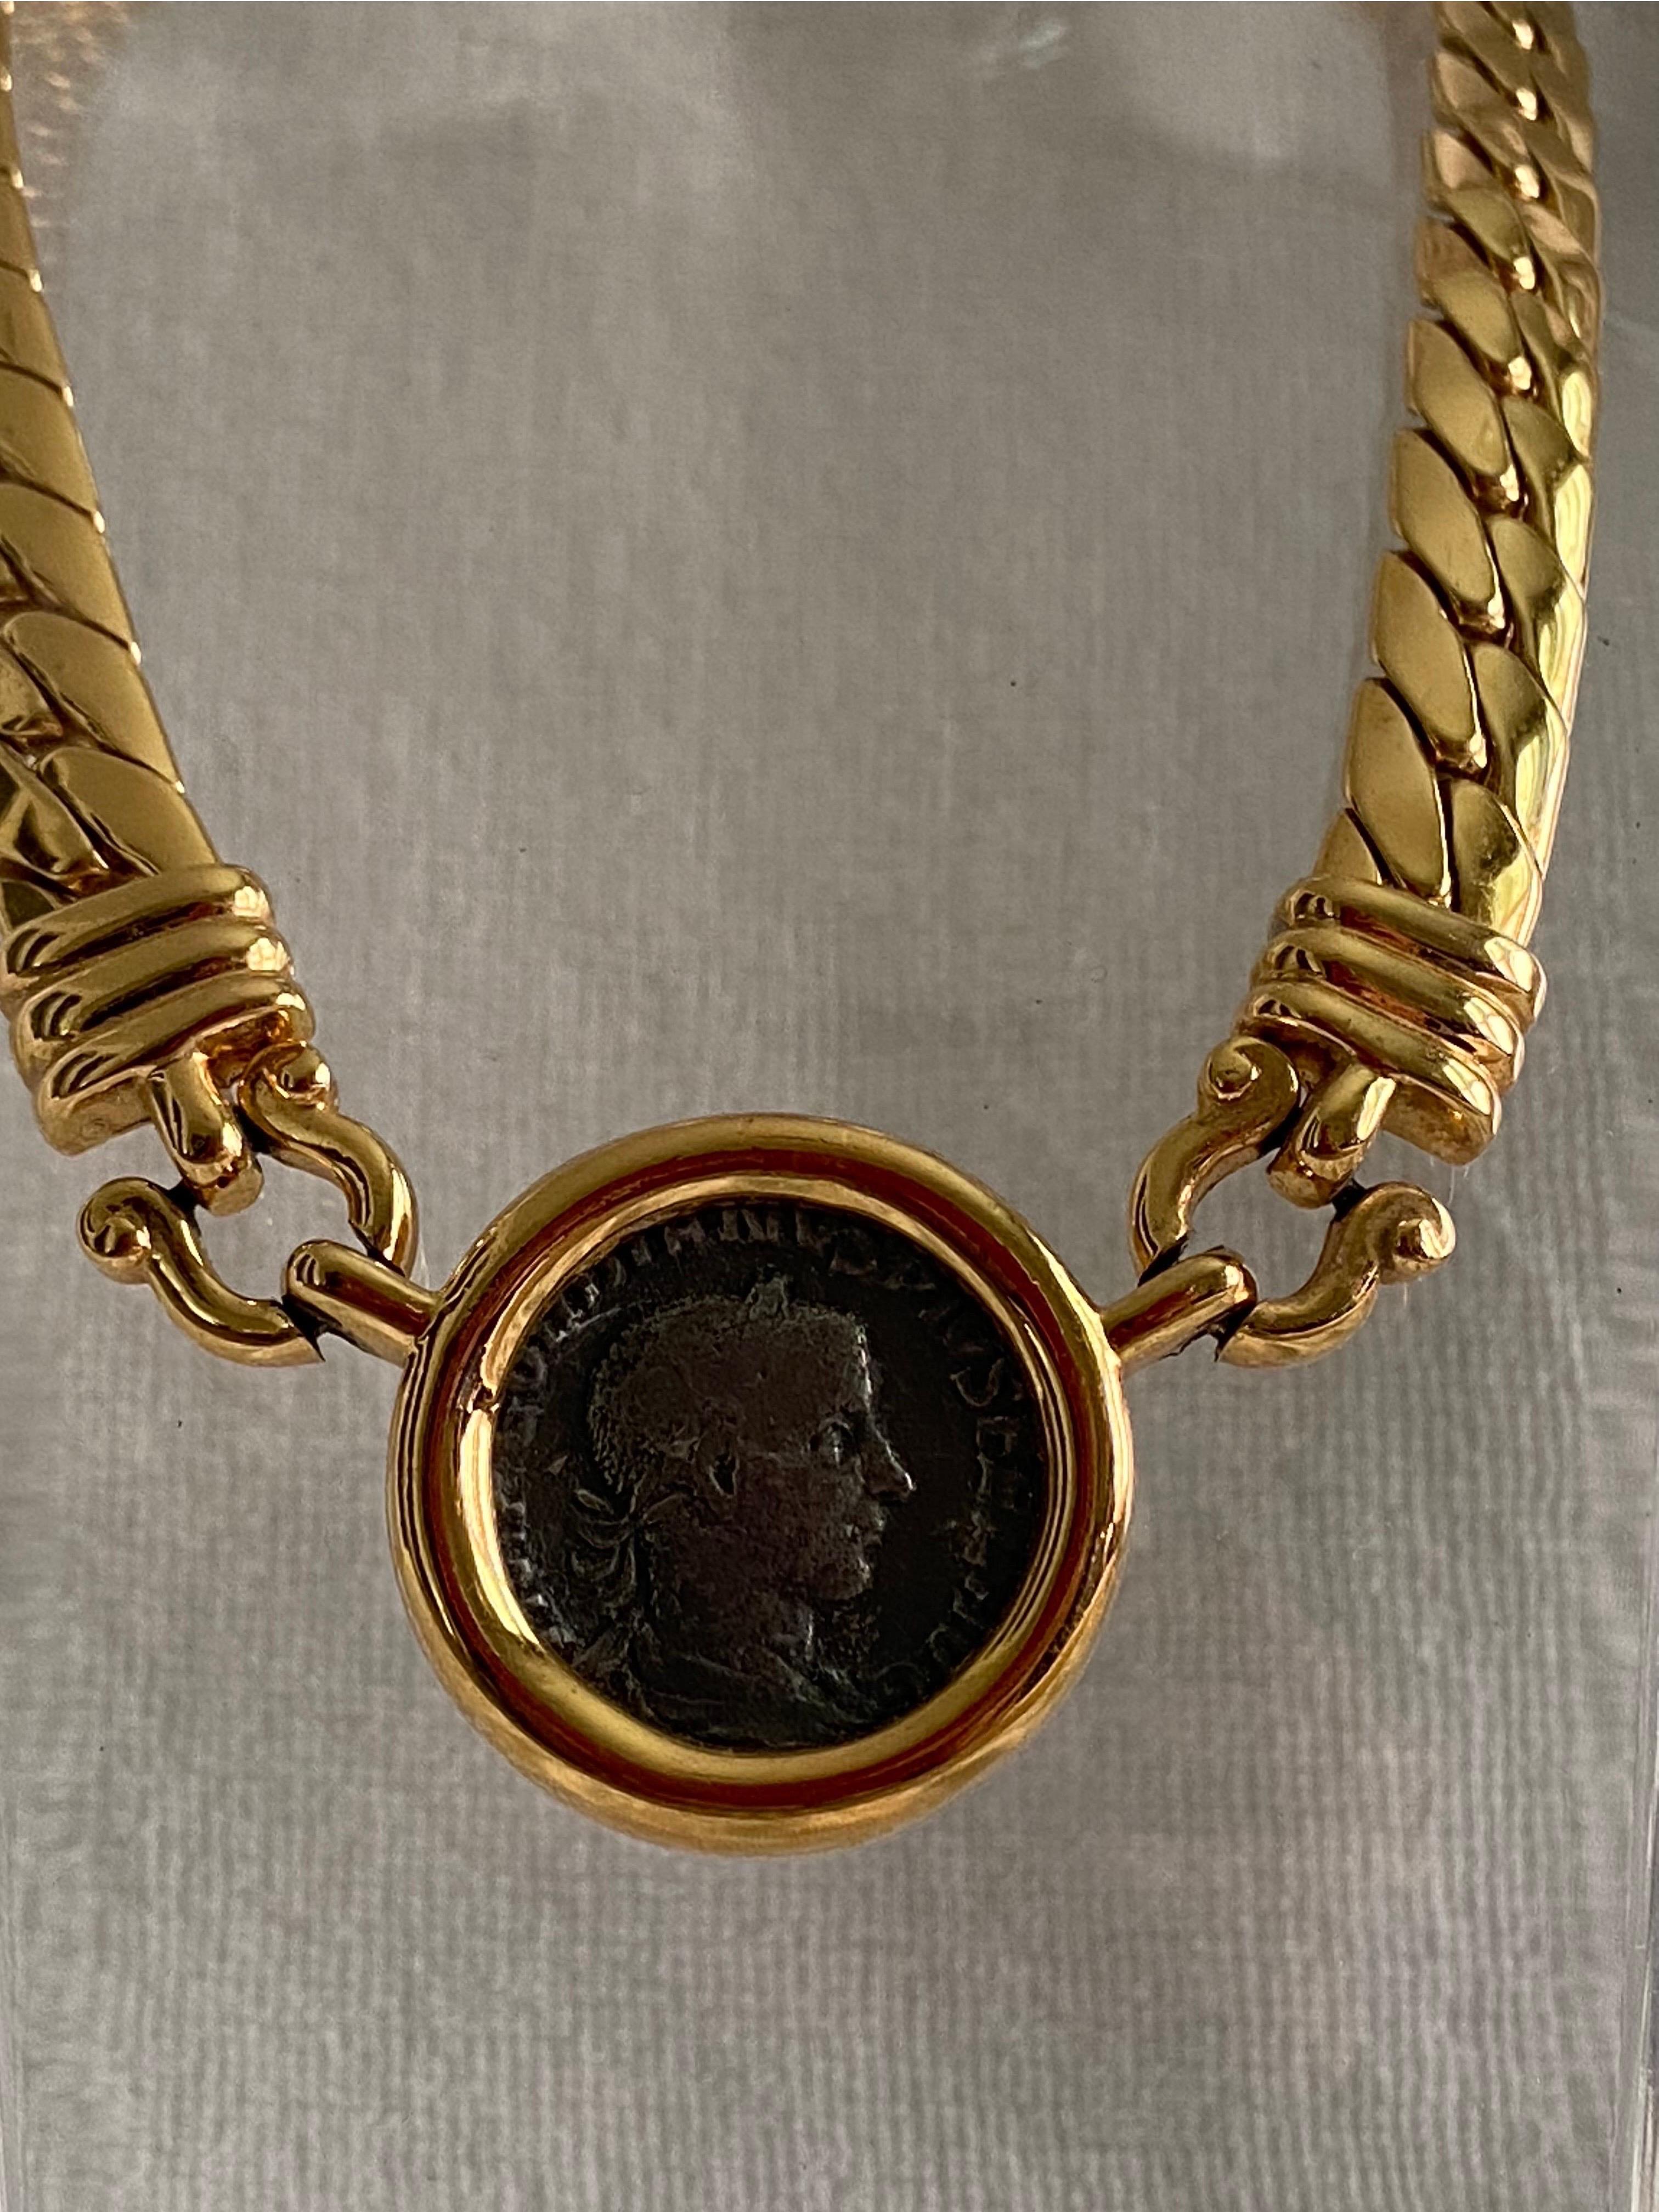 20th Century Vintage 1980’s Carolee Omega Gold Tone Necklace Choker with Faux Roman Coin